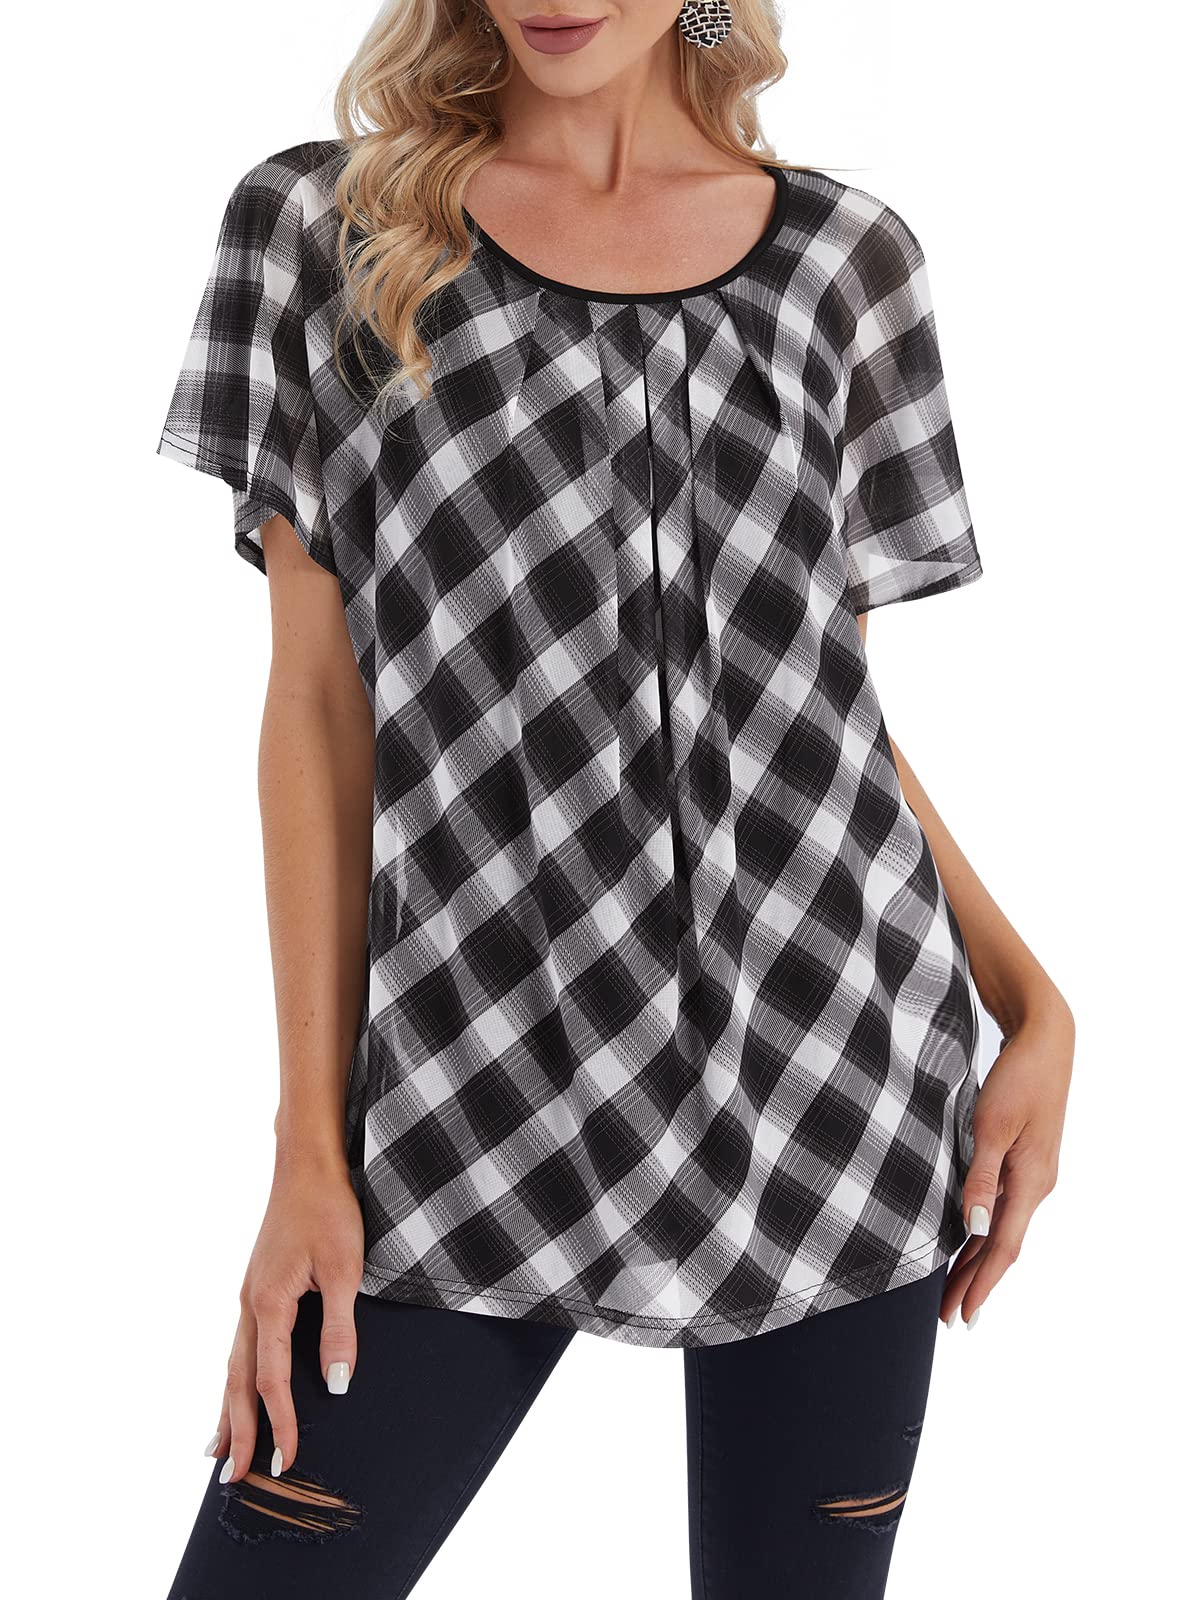 BAISHENGGT Womens Plaid Flouncing Flared Short Sleeve Pleated Front Mesh Blouses Tops